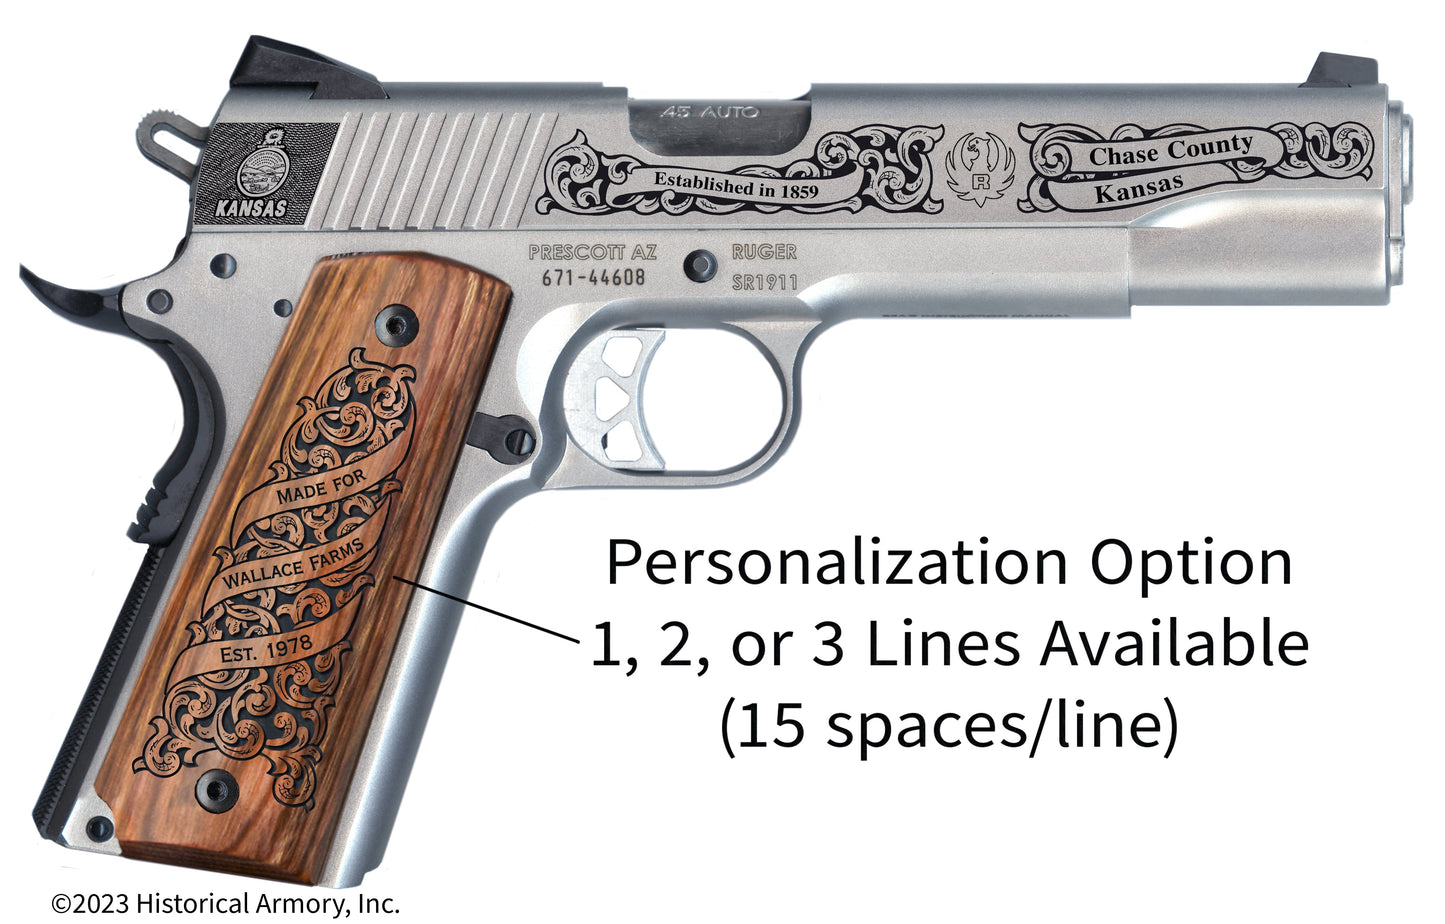 Chase County Kansas Personalized Engraved .45 Auto Ruger 1911